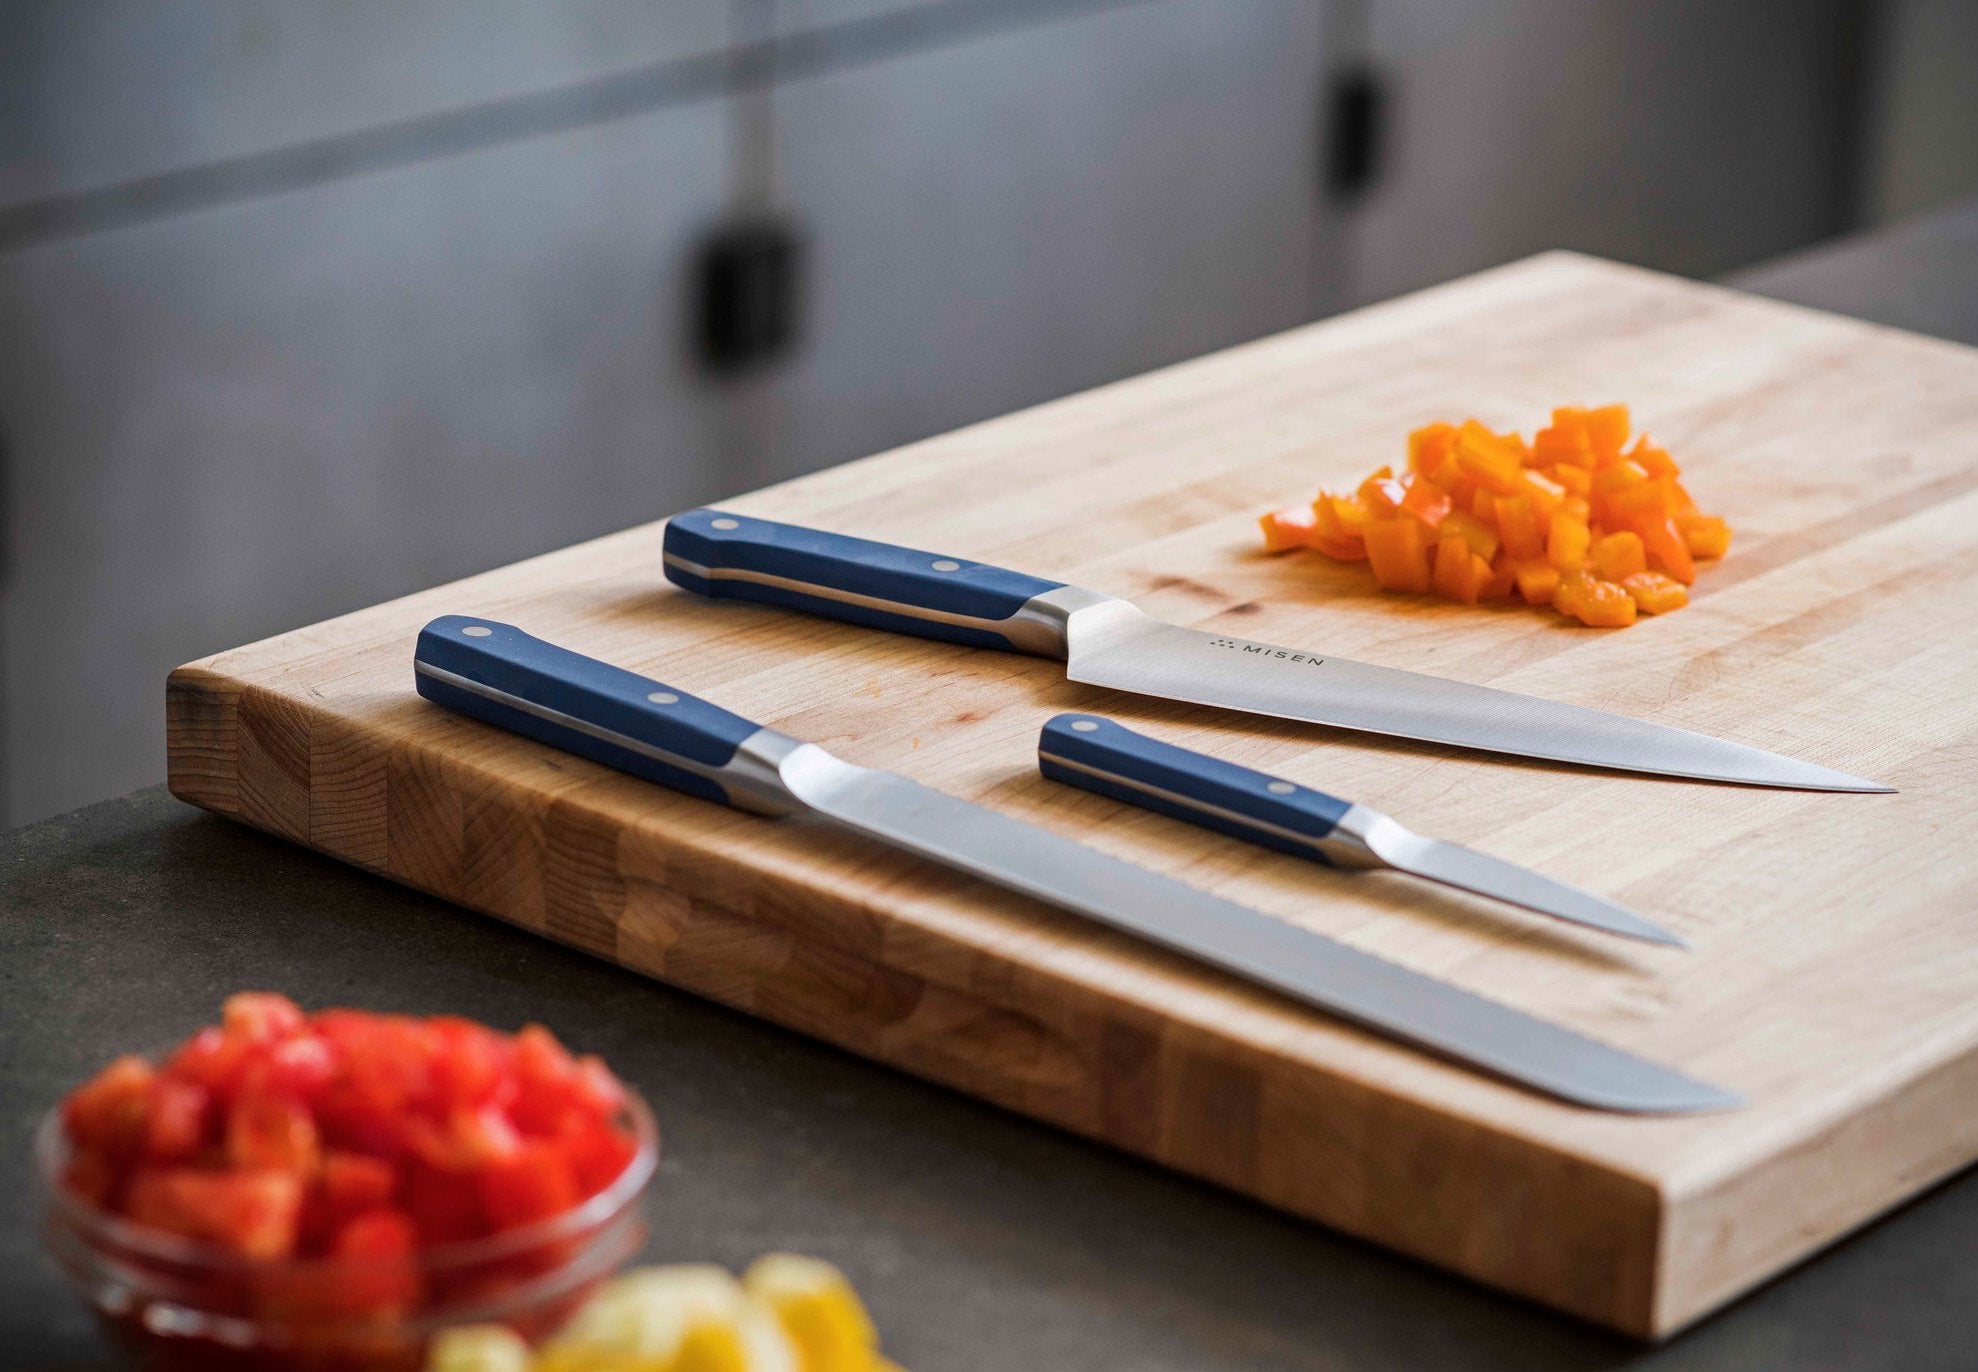 Knife cuts: three knives on a cutting board with finely diced vegetables